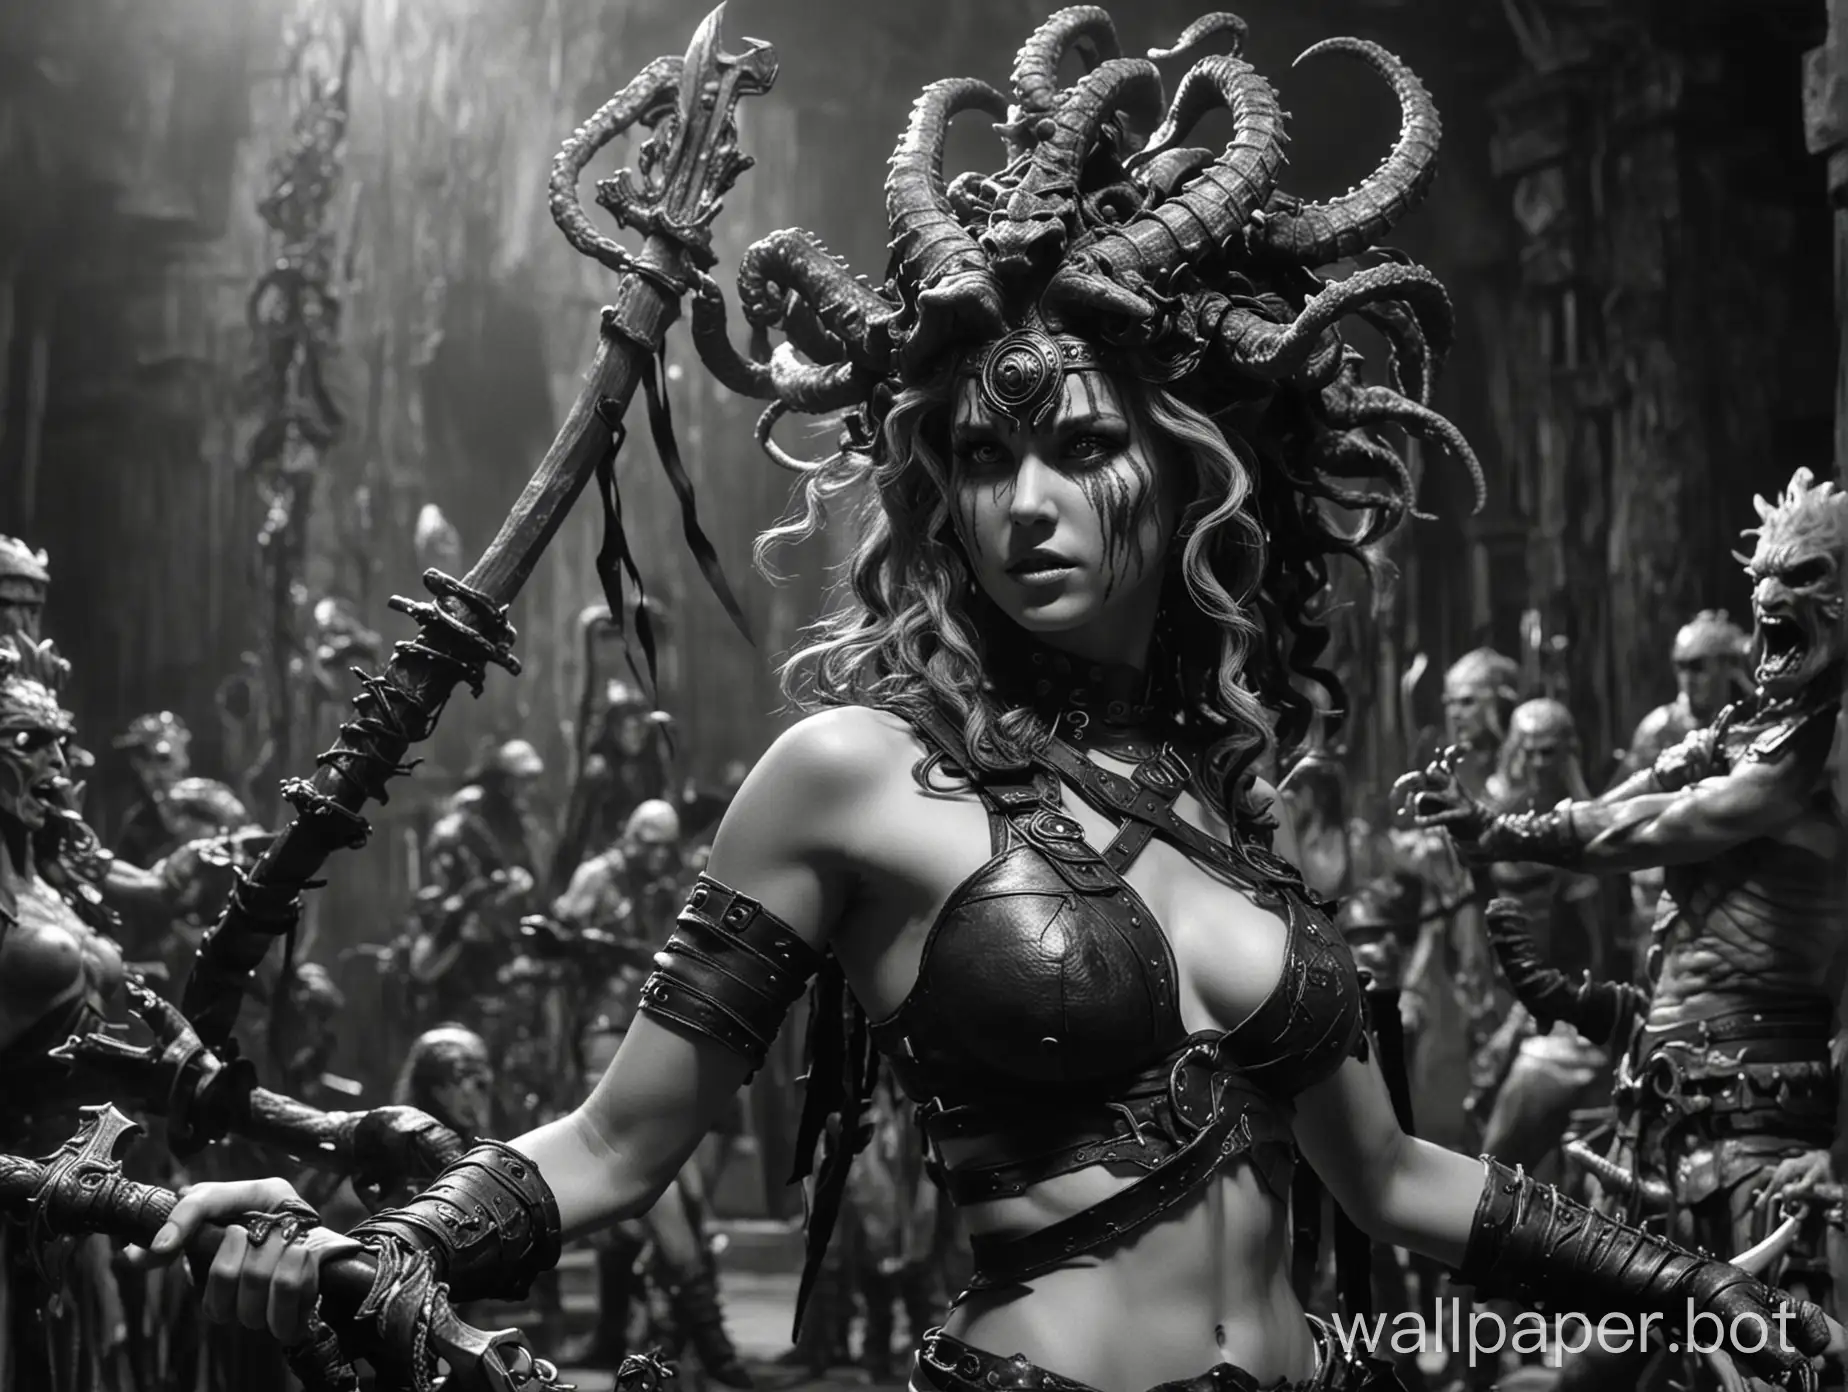 Ghastly-Glitchpunk-Medusa-Barbarian-in-Dungeons-and-Dragons-Movie-Still